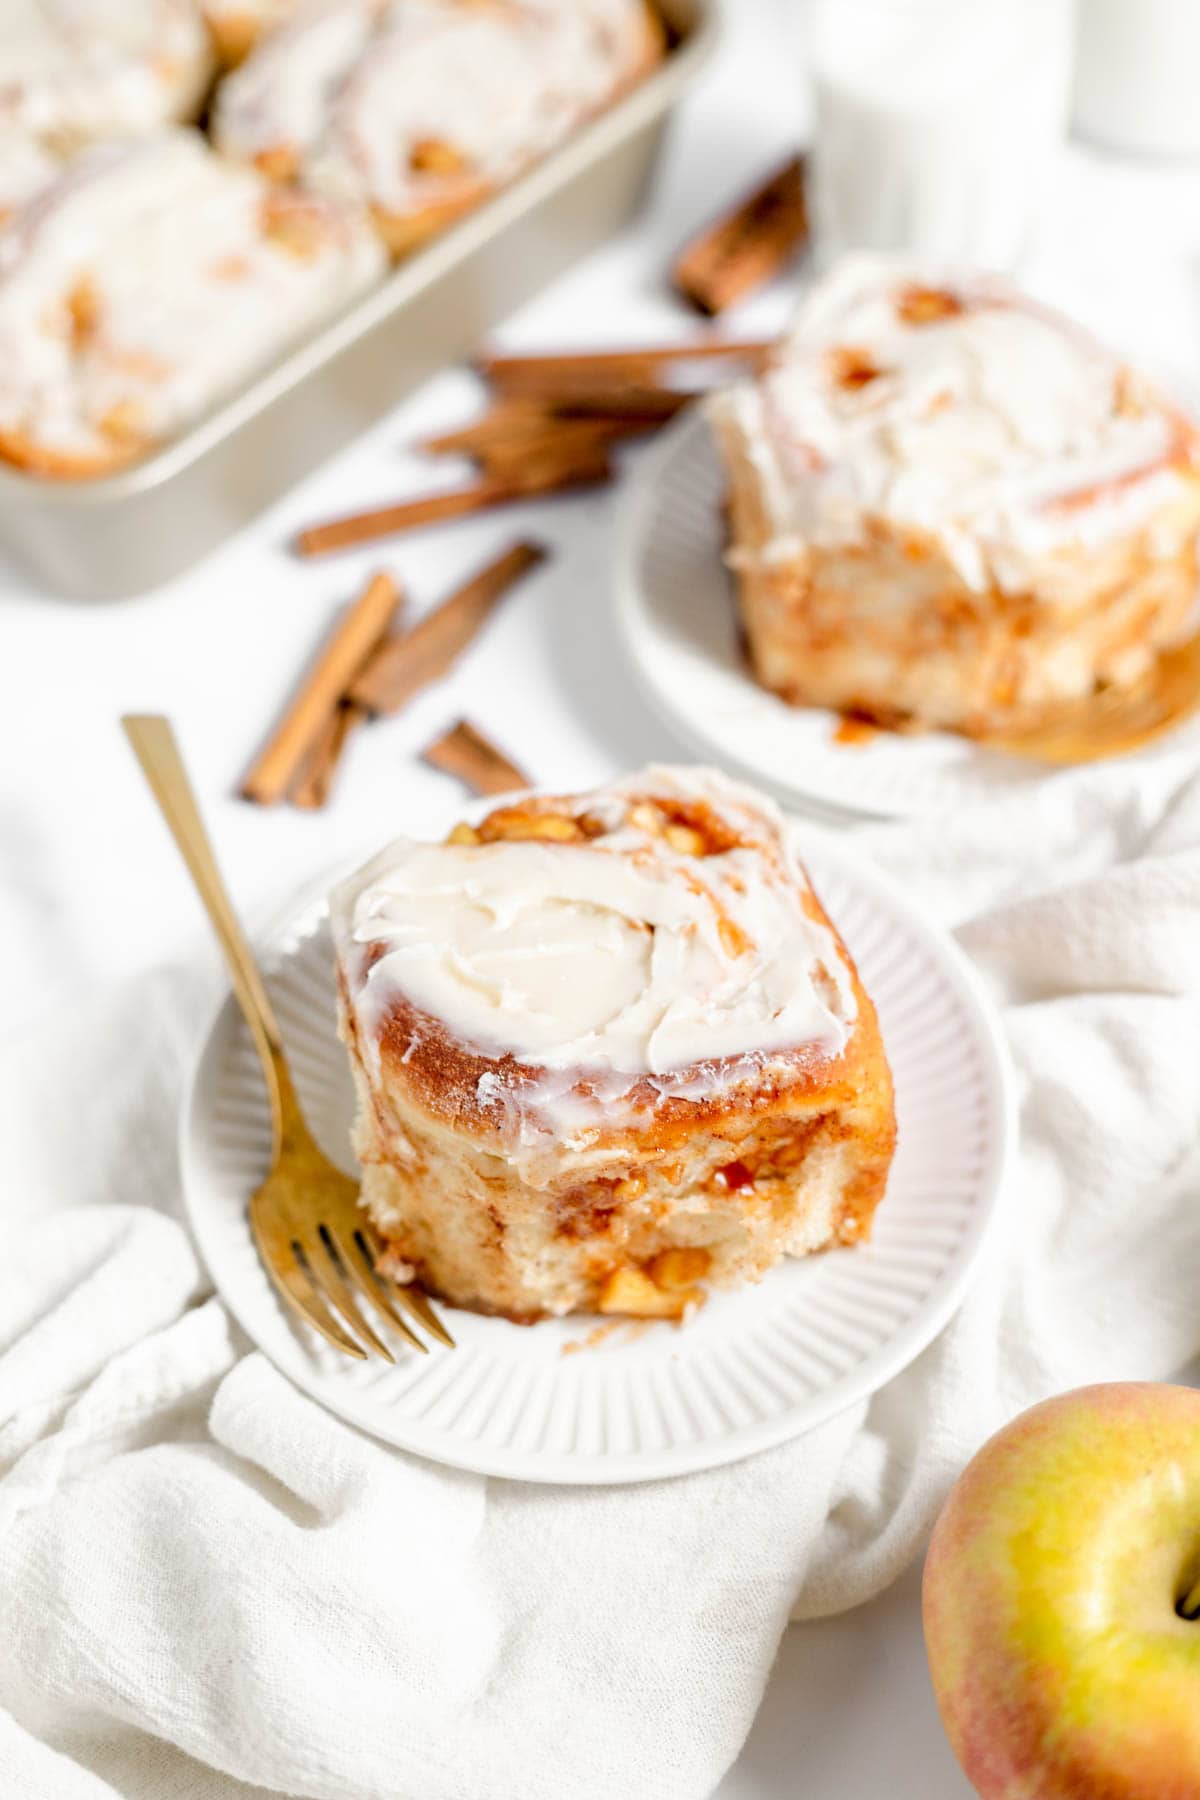 An image of apple cinnamon rolls on white plates next to apples and cinnamon sticks.